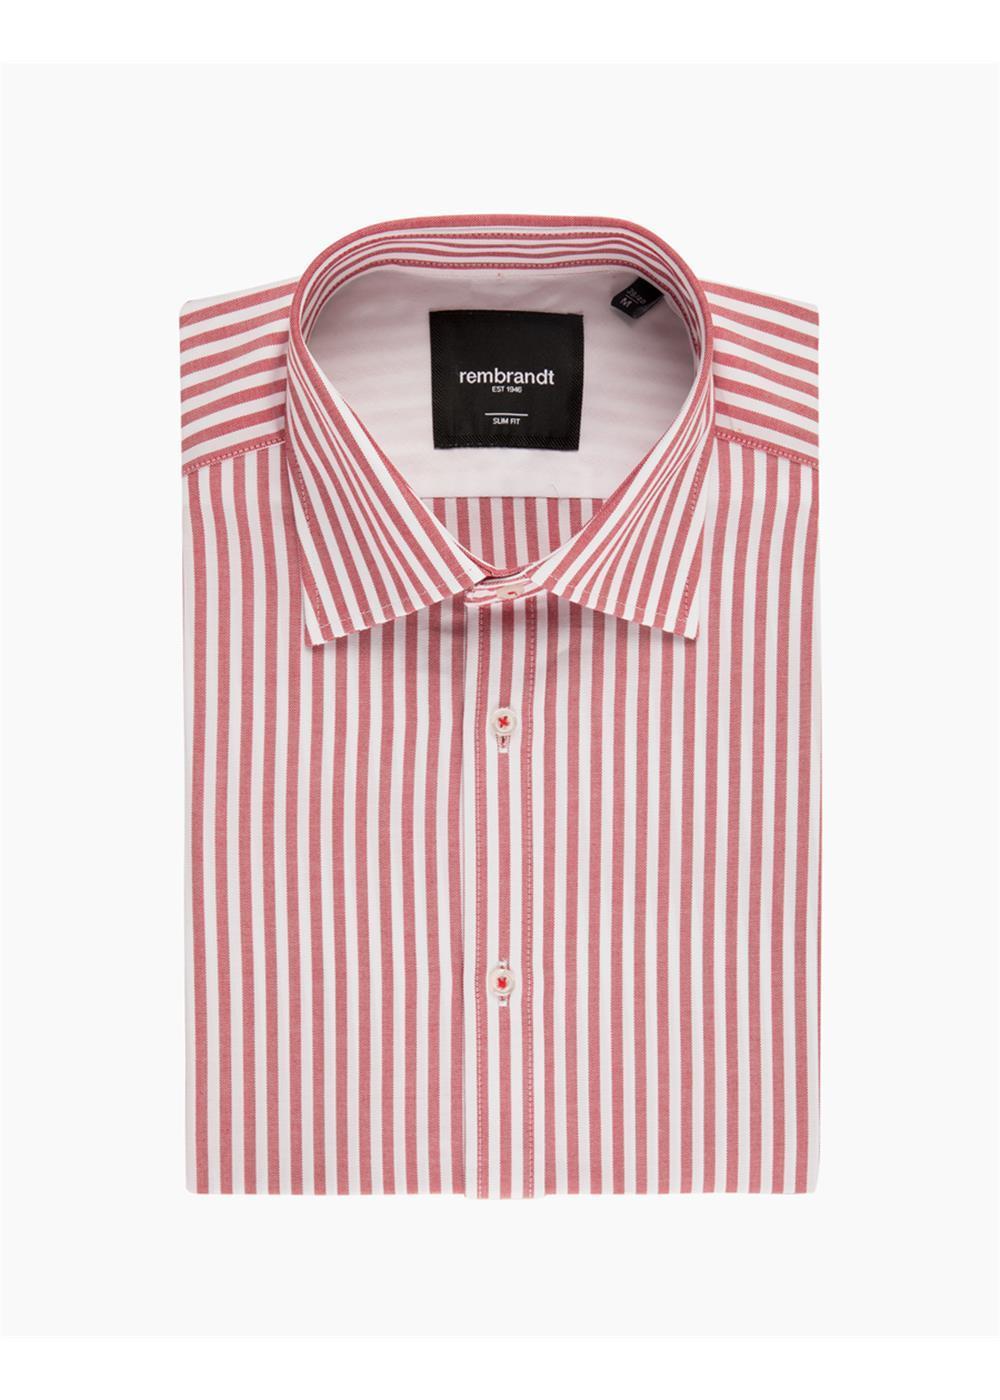 Rembrandt - Ohope Shirt - Red/White Stripe